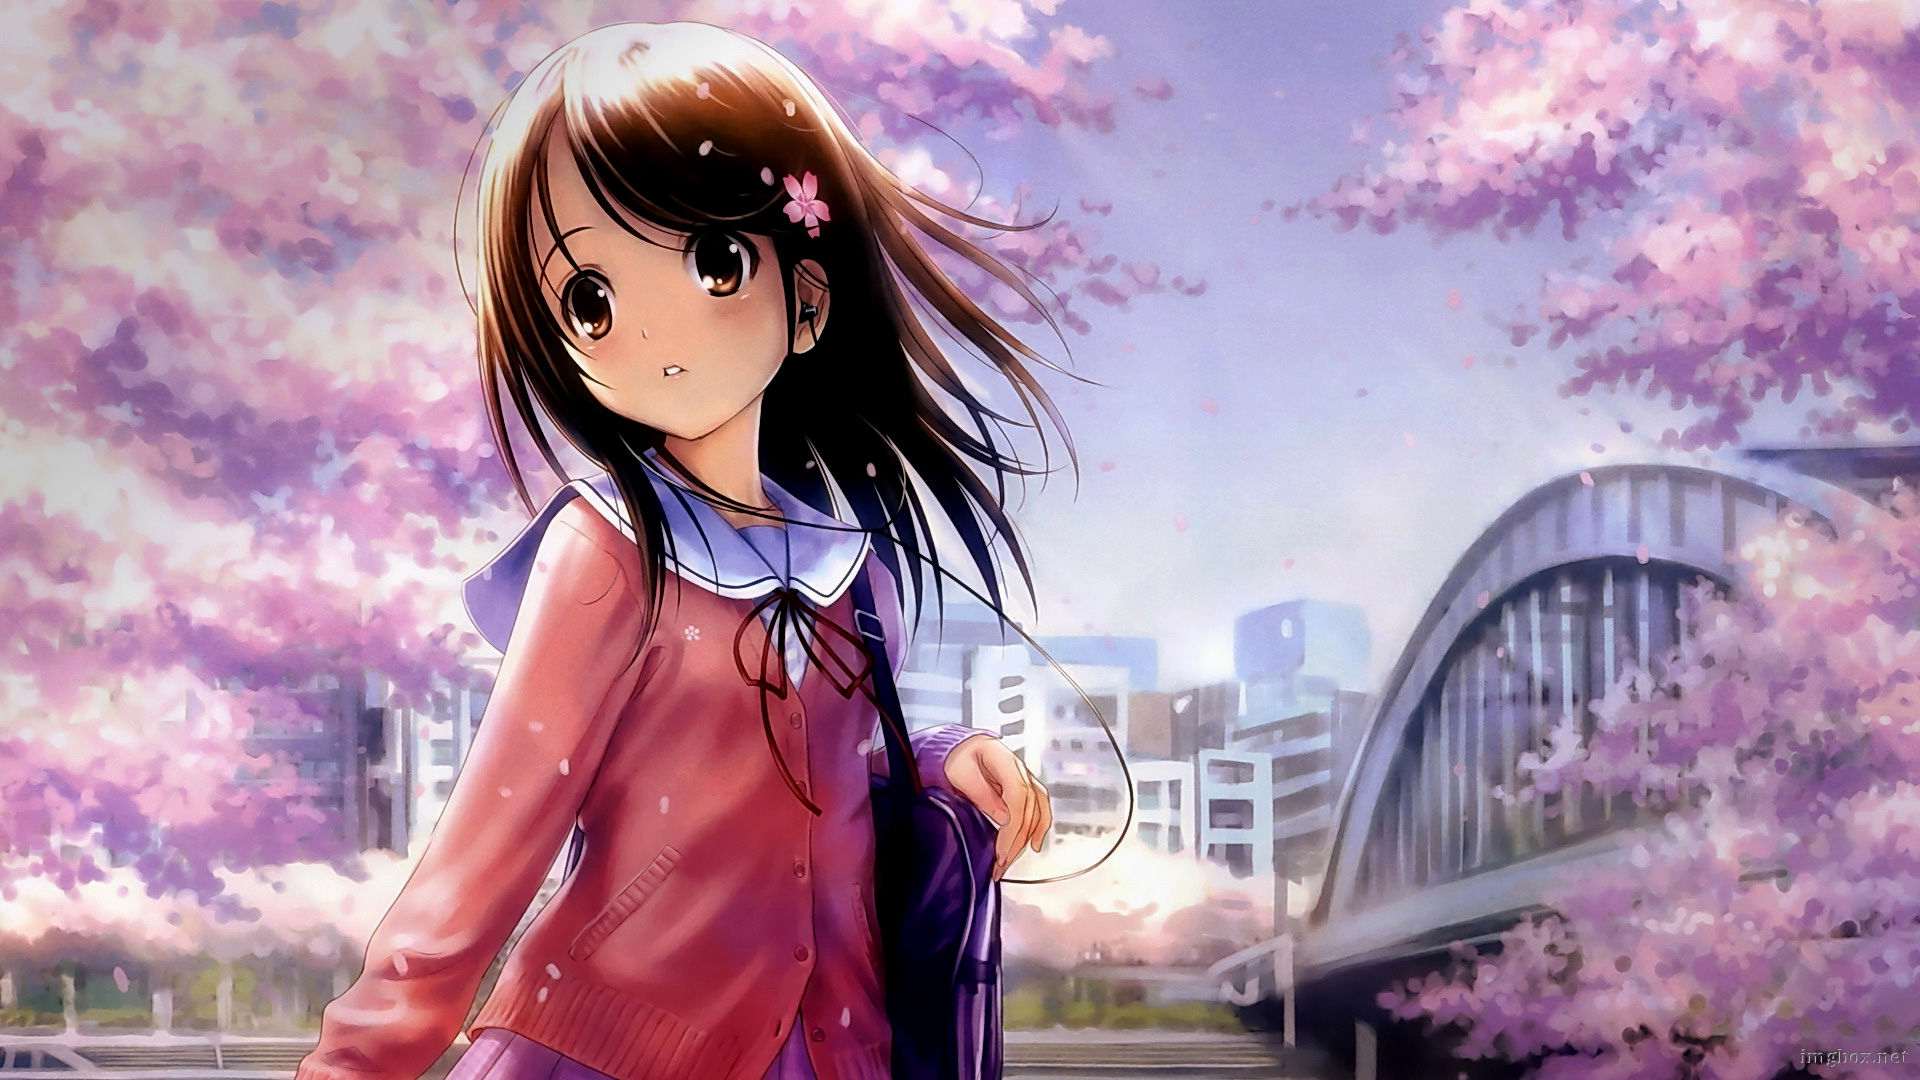 Wallpaper From Anime Category - Download Gambar Anime Hd , HD Wallpaper & Backgrounds